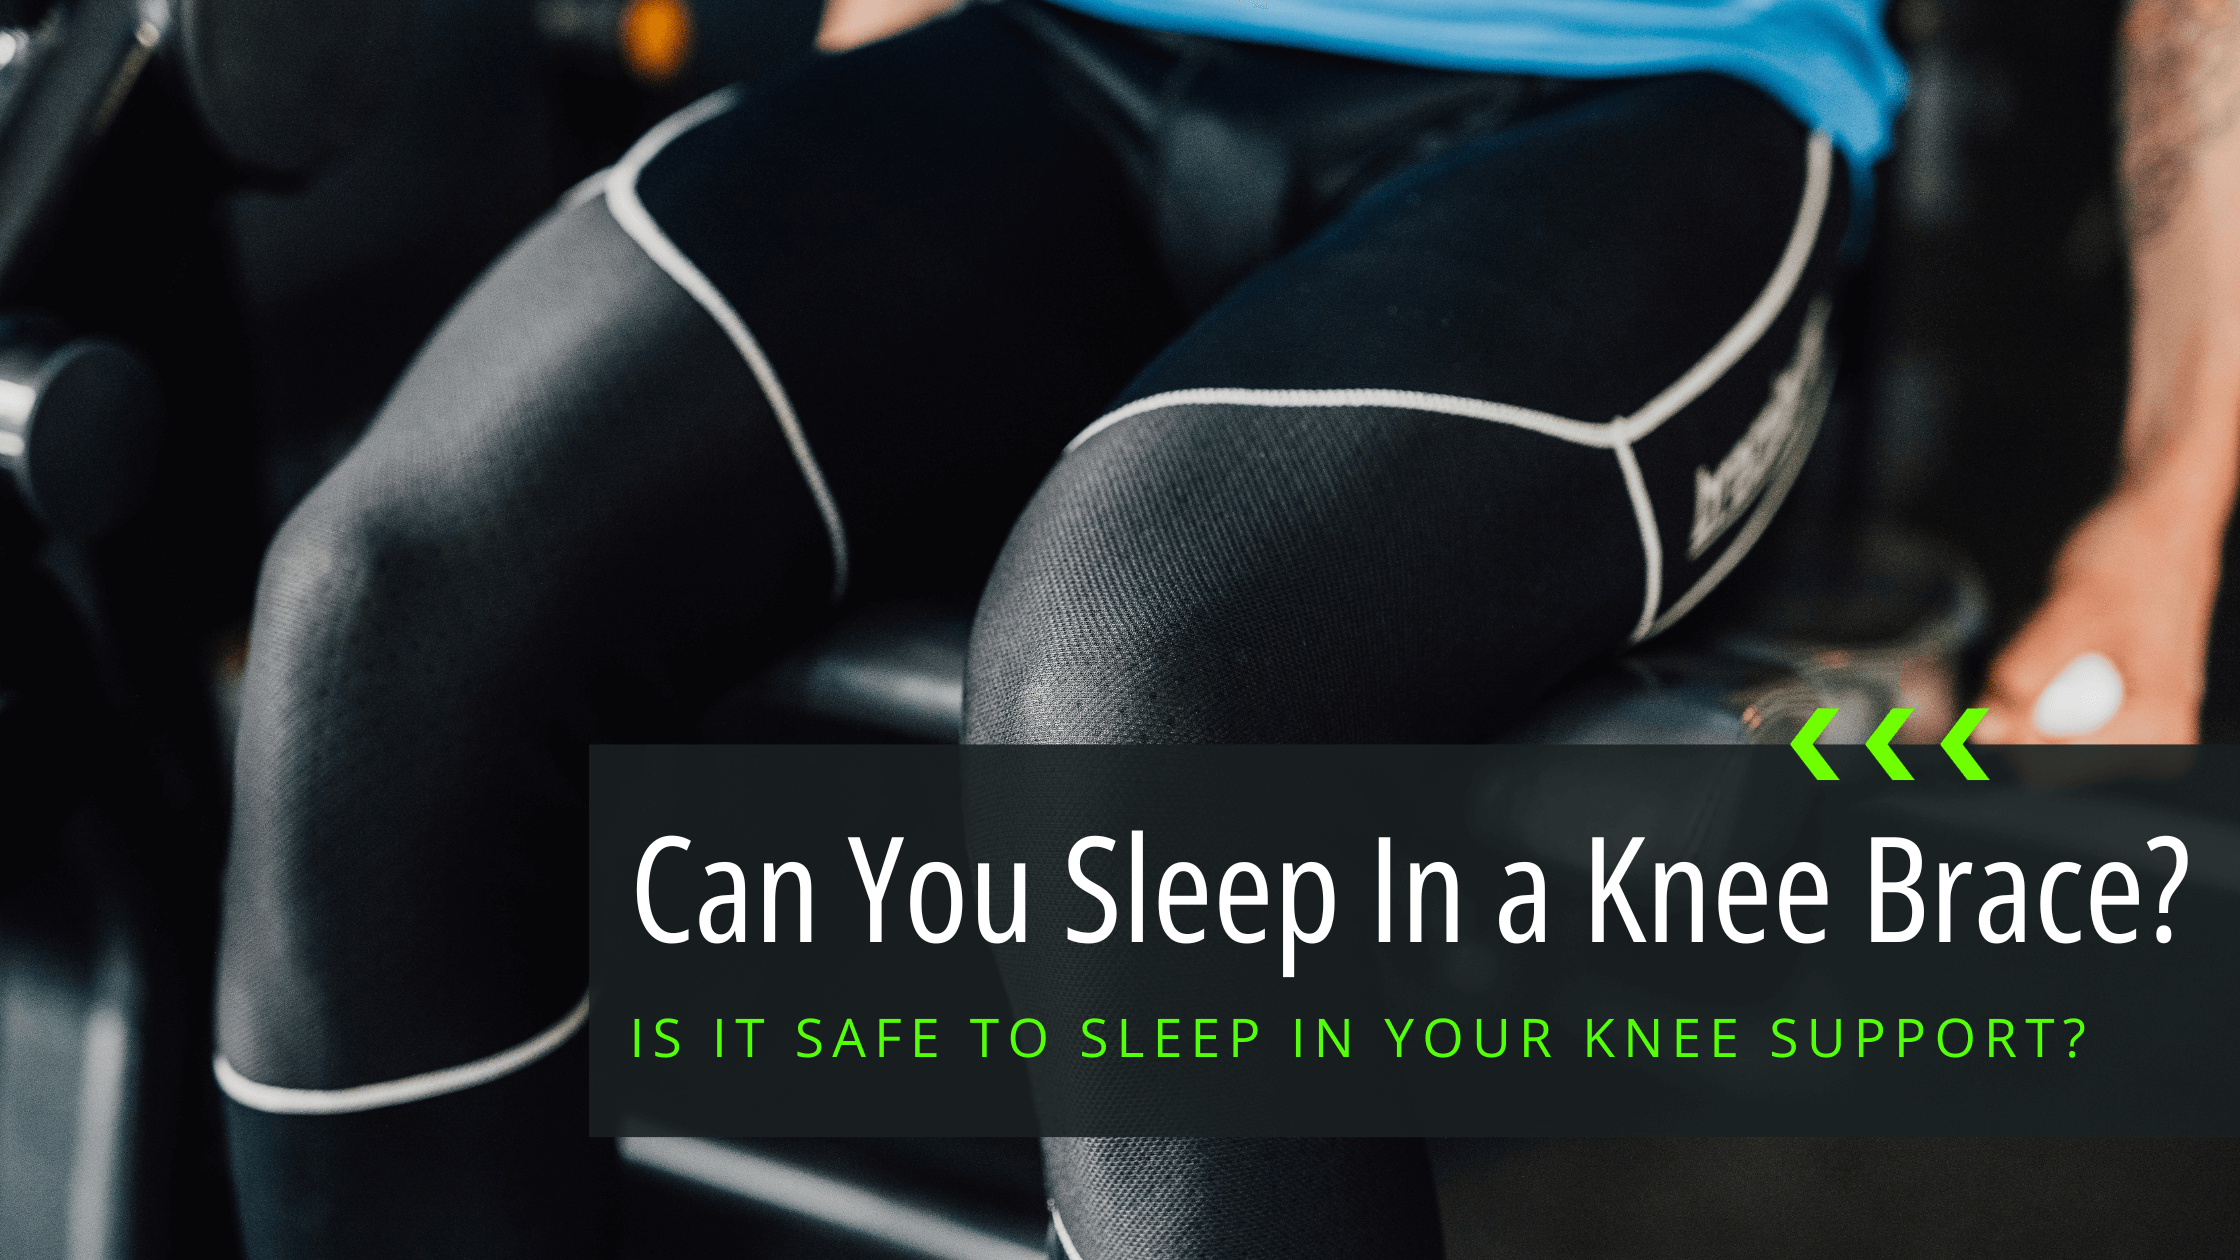 Blog header for "Can you sleep in a knee brace or knee compression sleeves?" Learn more about sleeping in a knee brace, sleep in knee brace, do doctors recommend sleeping in knee braces, knee pain, knee recovery, compression for knee pain, healing from kn